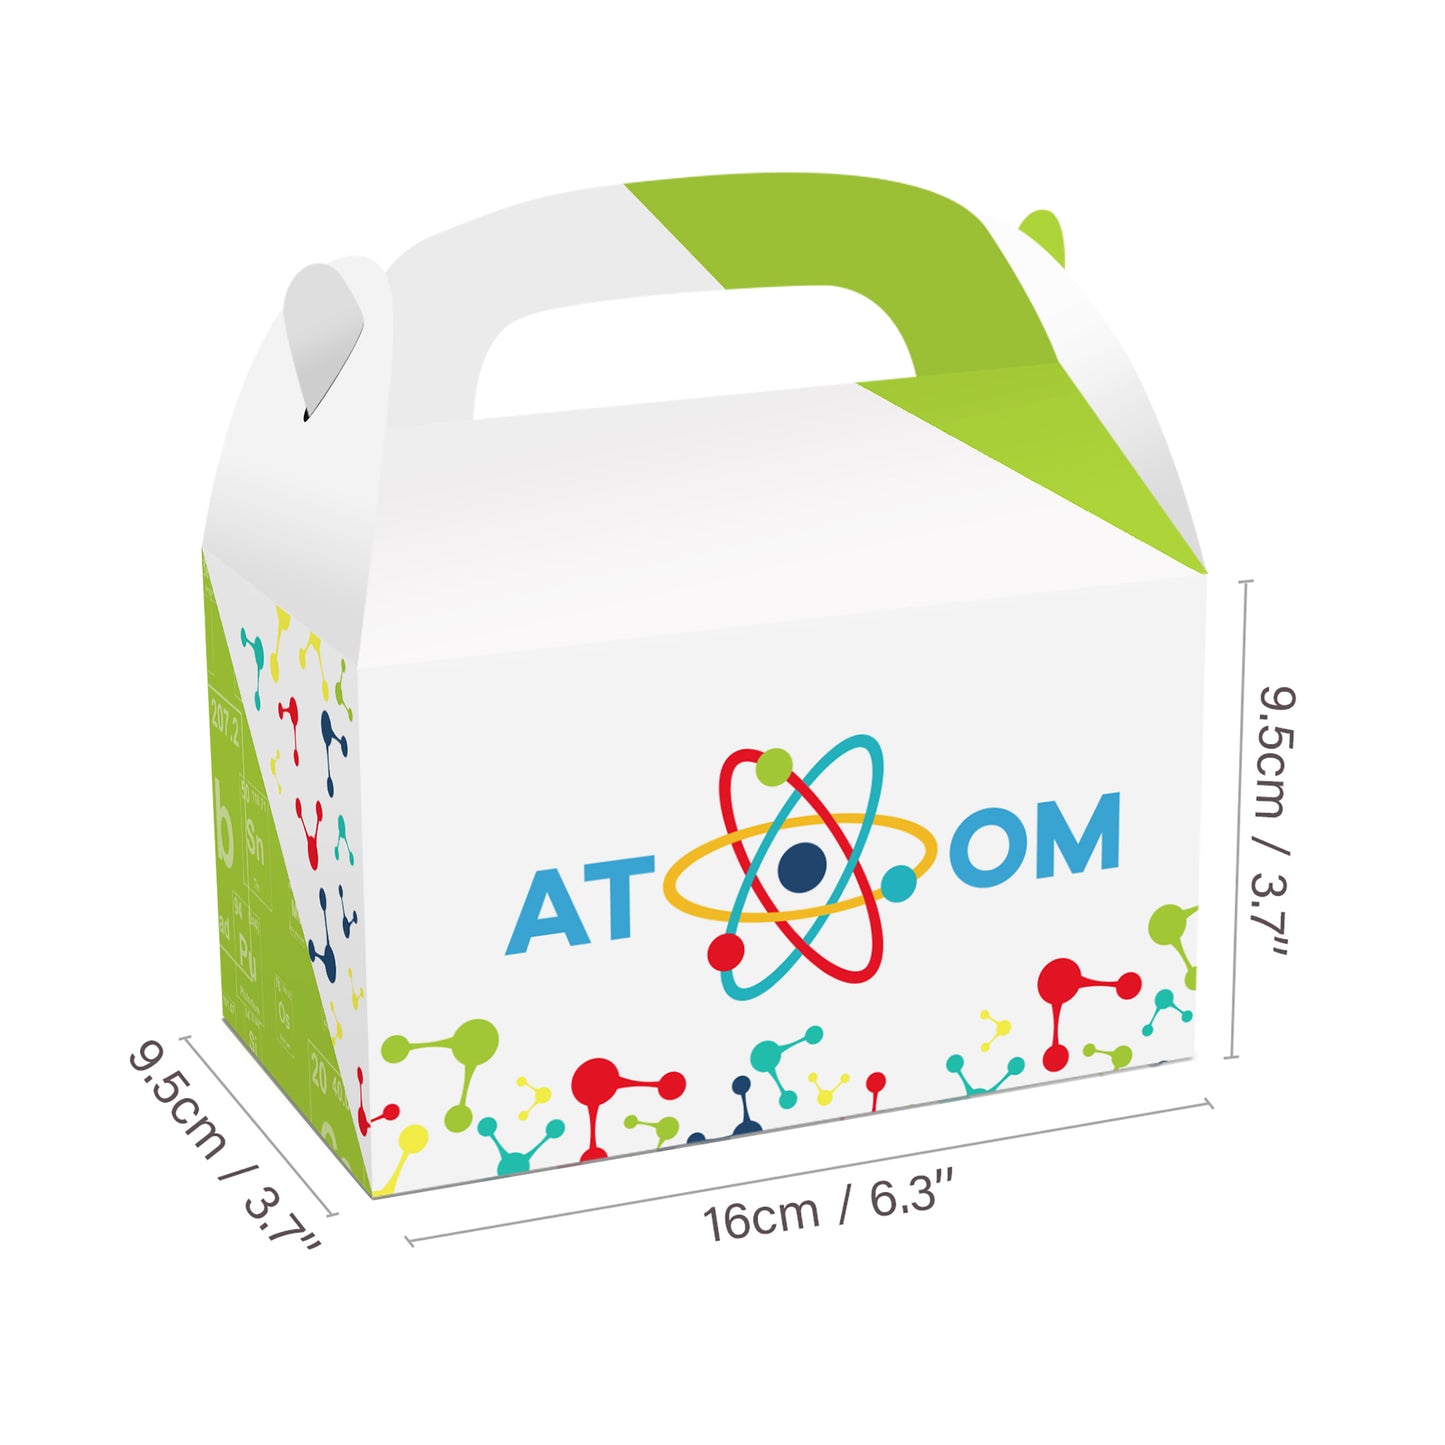 We Love Science Paper Boxes, 12-pc